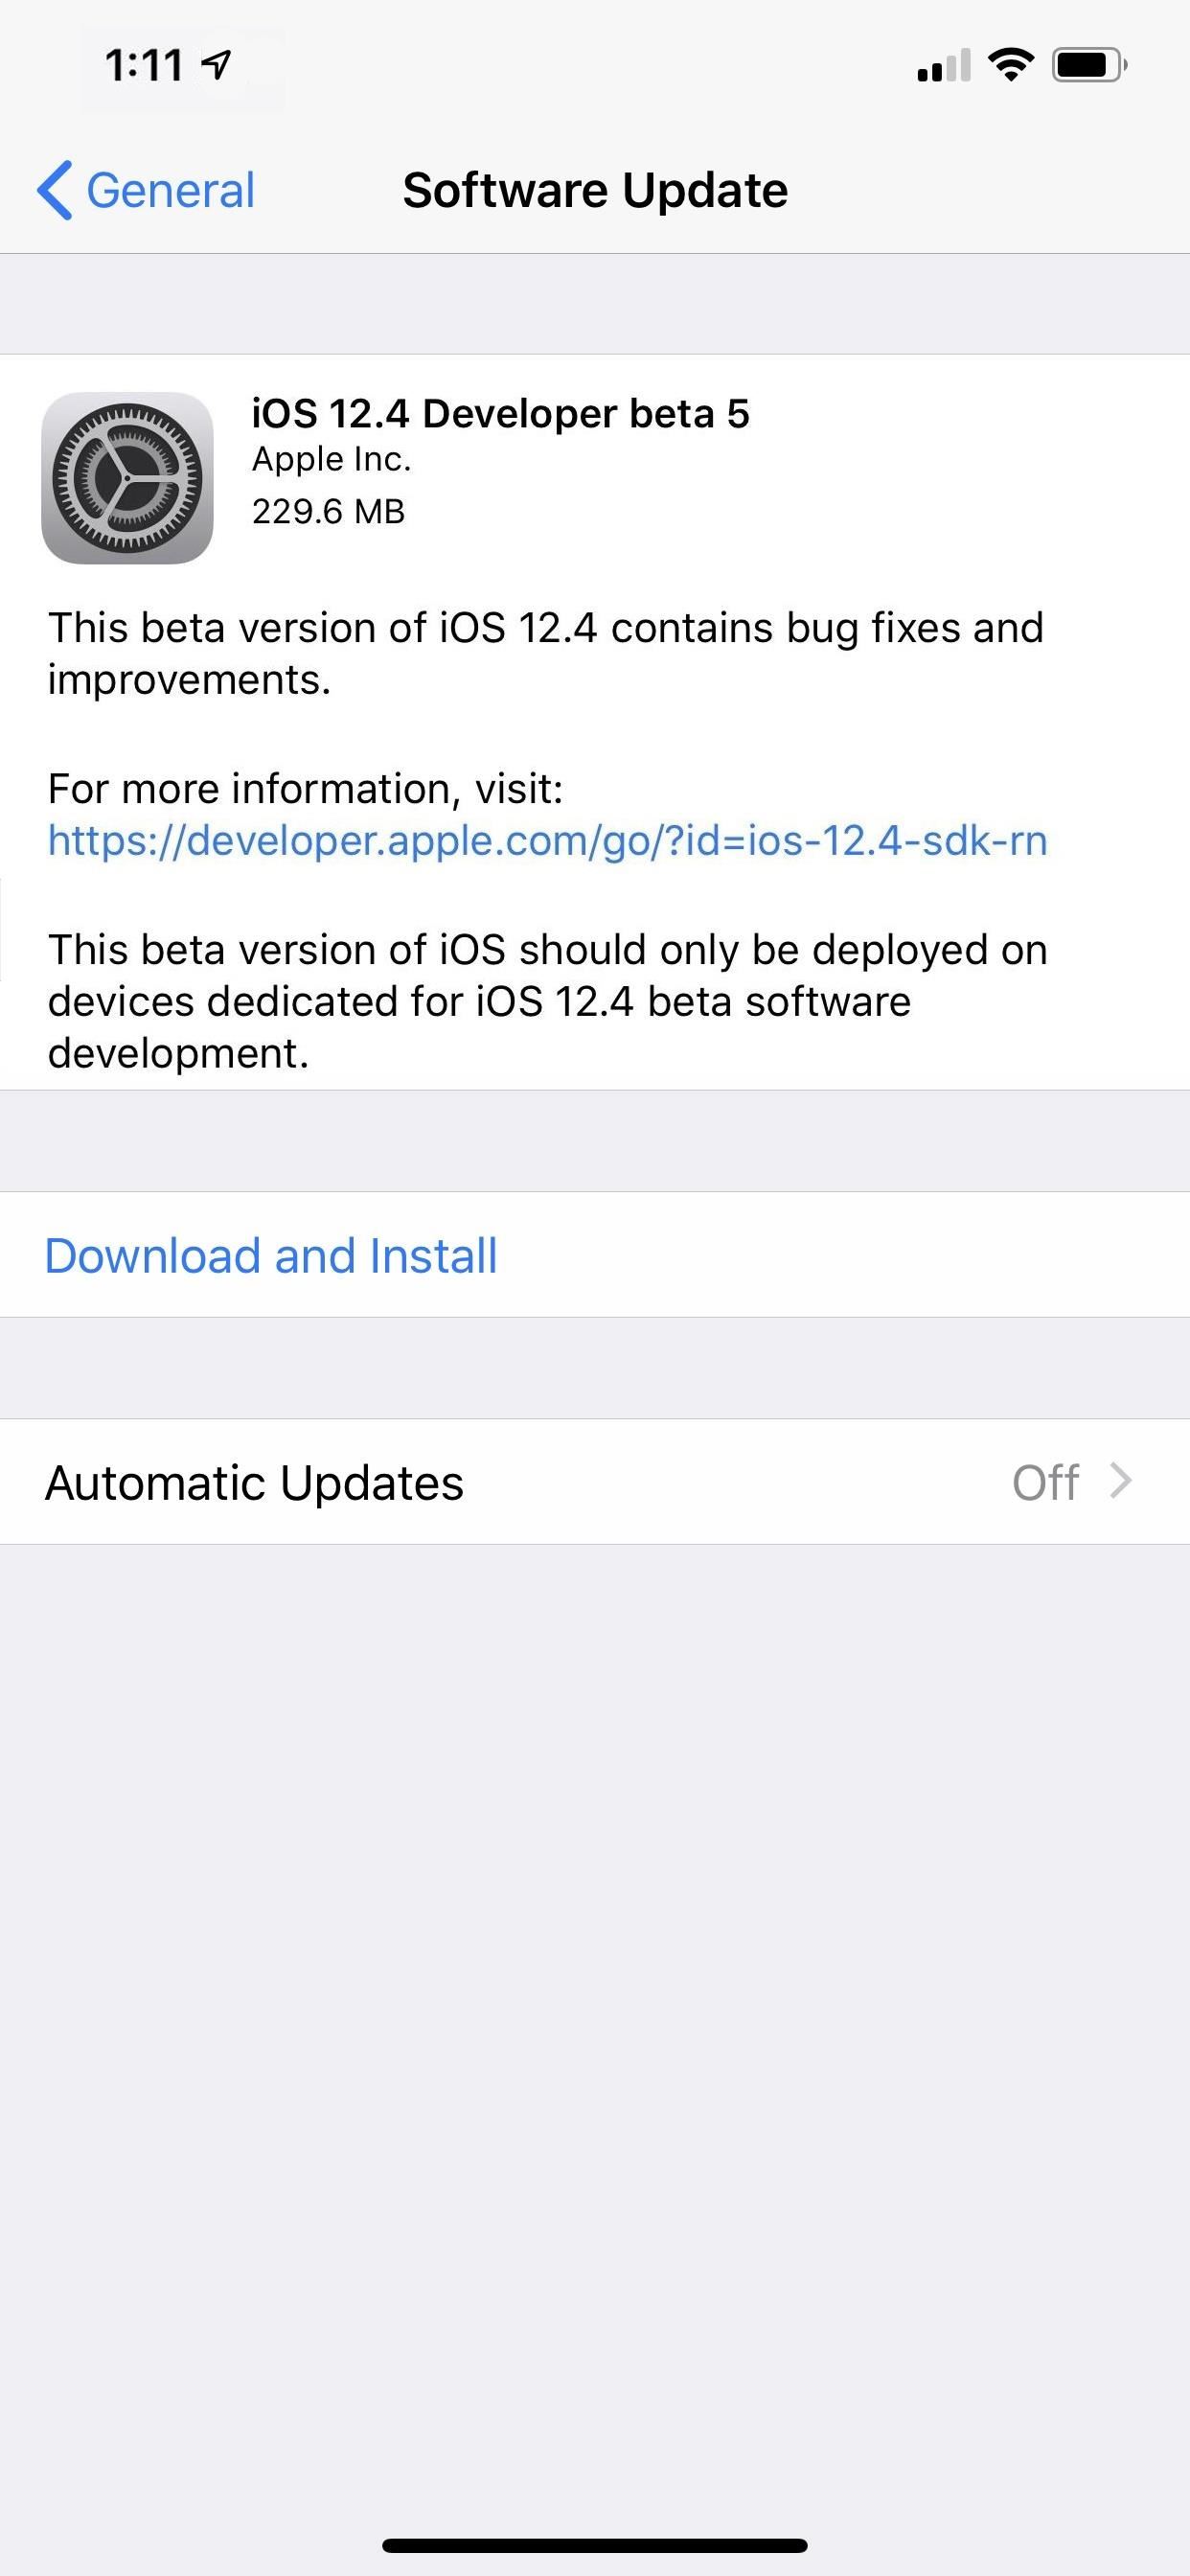 Apple Releases iOS 12.4 Beta 5 for Developers & Public Beta Testers